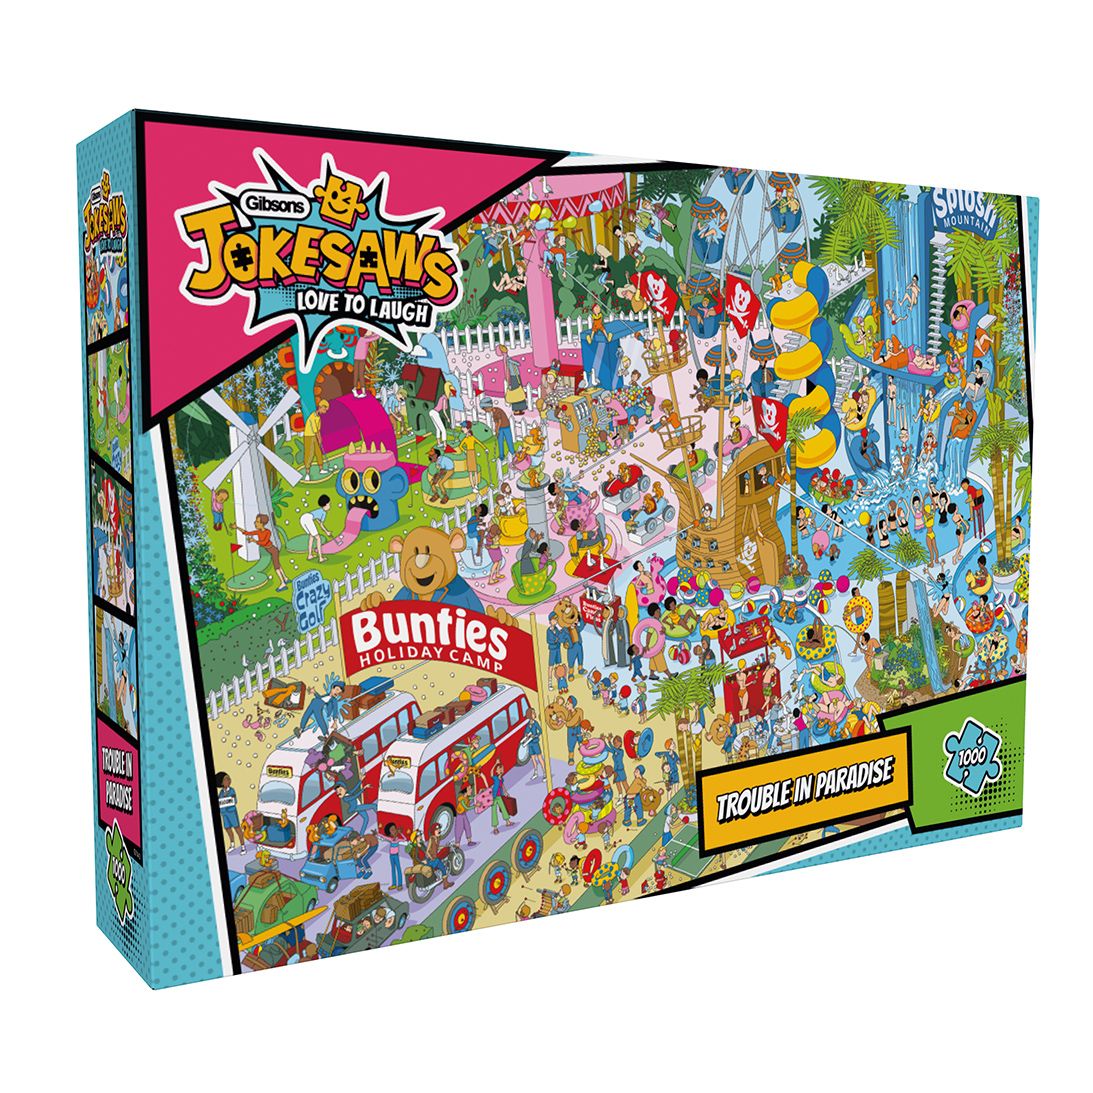 Jokesaws: Trouble in Paradise 1000 Piece Jigsaw Puzzle